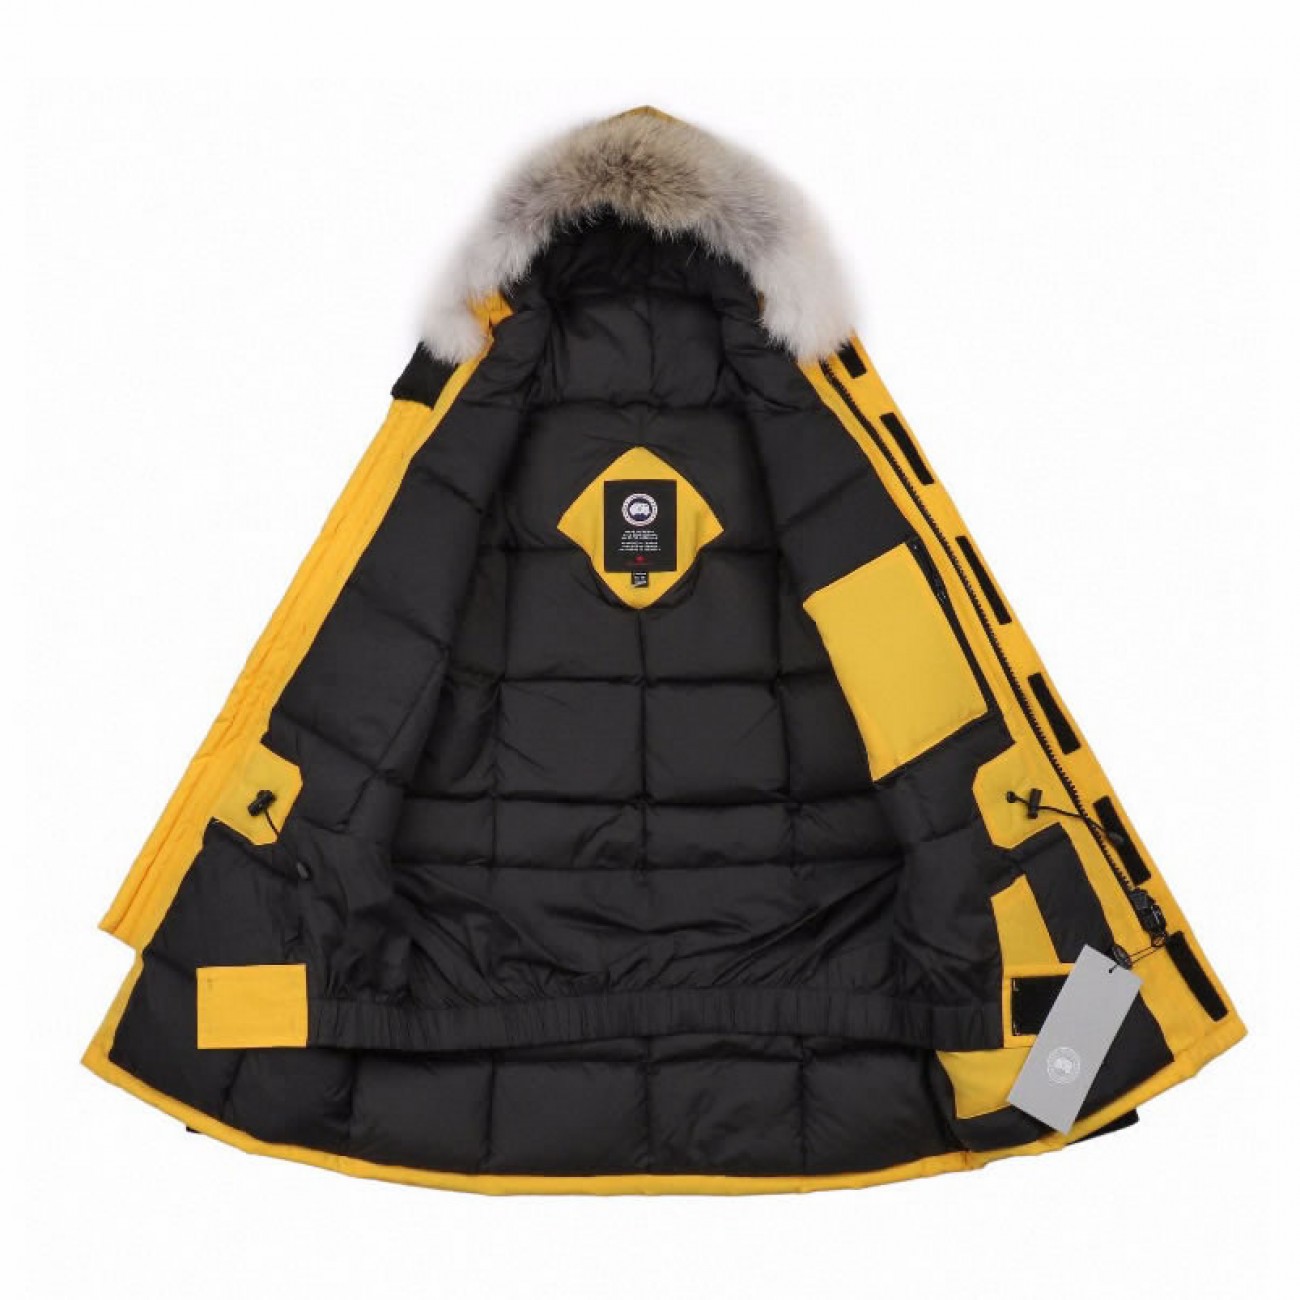 08 ' Canada Goose '19FW Expedition 4660MA Down Jacket Coat "Yellow"